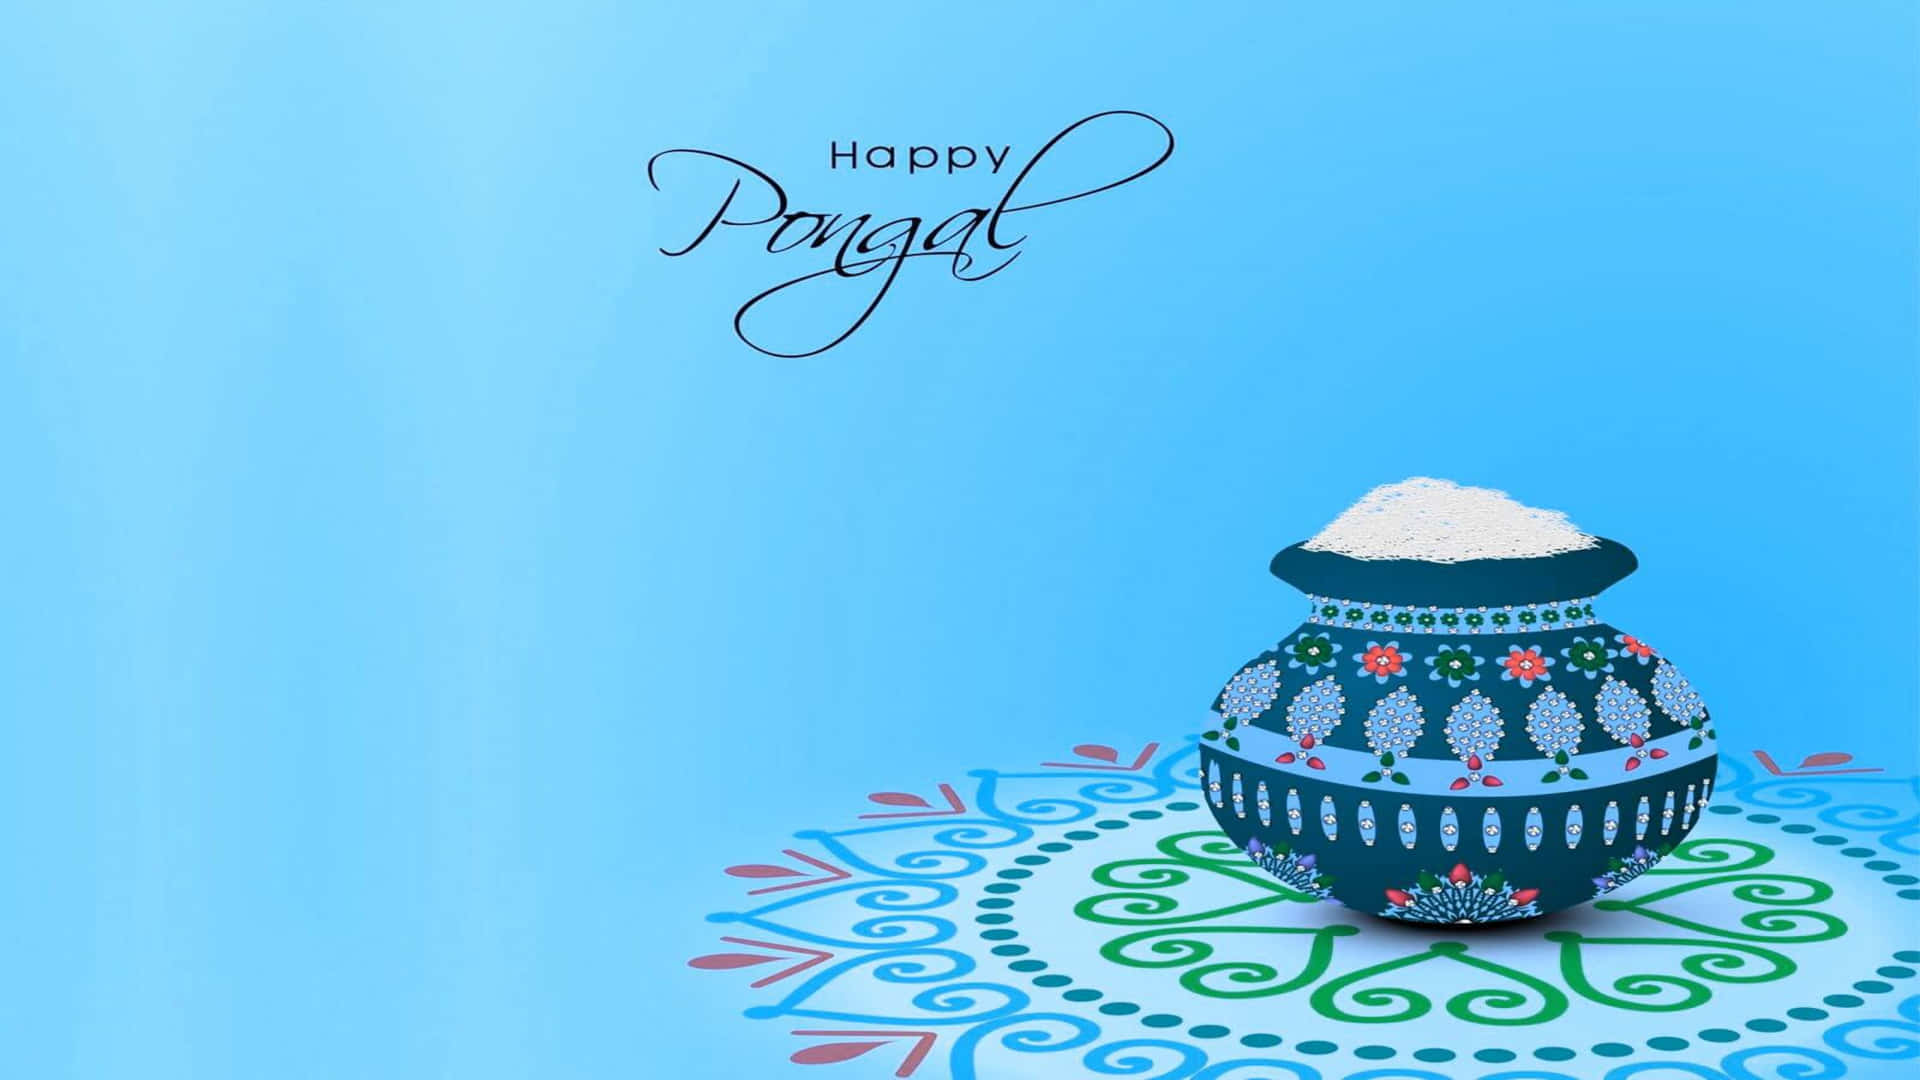 Celebrate the harvest festival of Pongal with loved ones